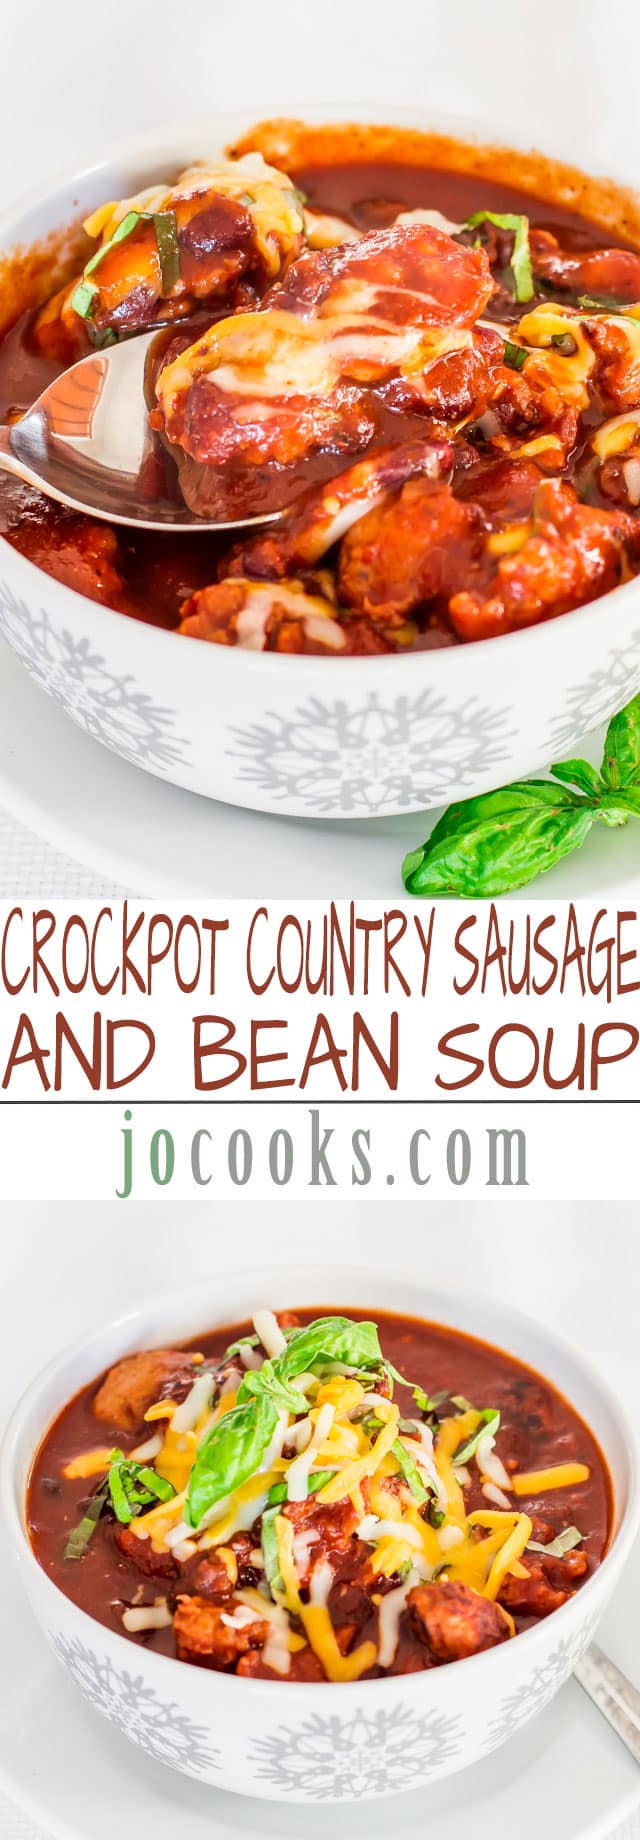 Crockpot Country Sausage and Bean Soup collage